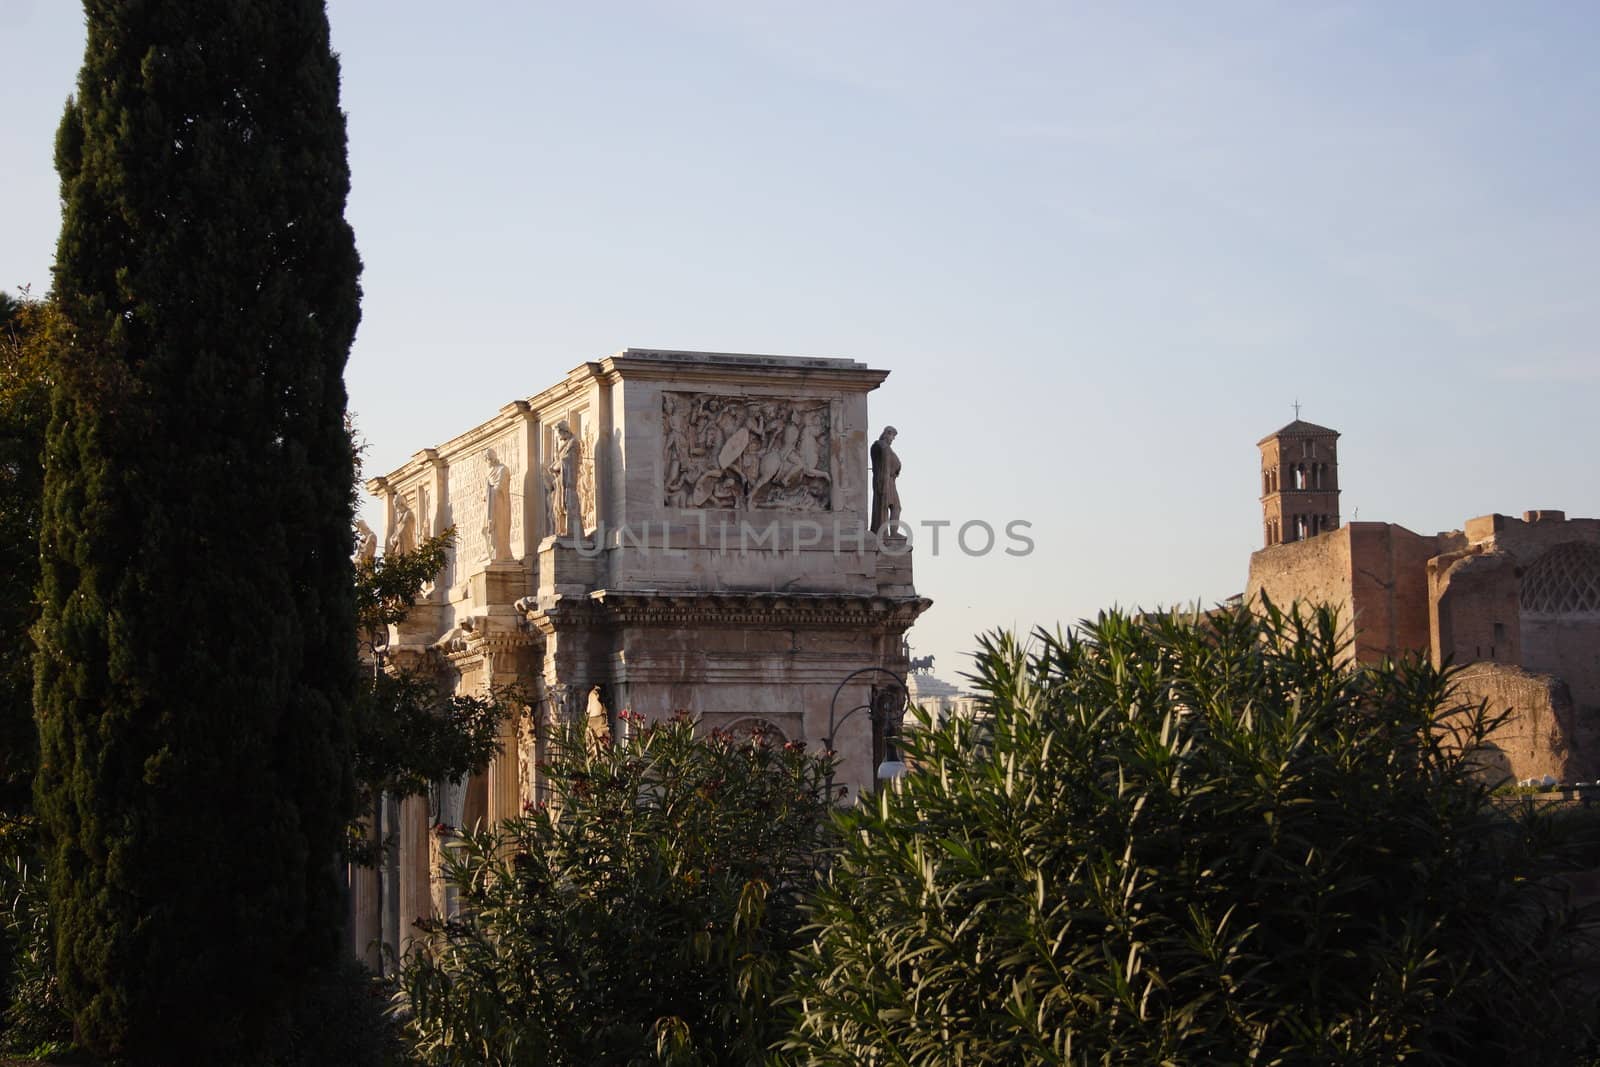 Rome, monuments, tourism, holiday, Italy, culture, Arch of Constantine, europe, famous, historic, landmark, travel, travelers,architecture, art , attraction, building, monument, destination, famous, history, Italian,